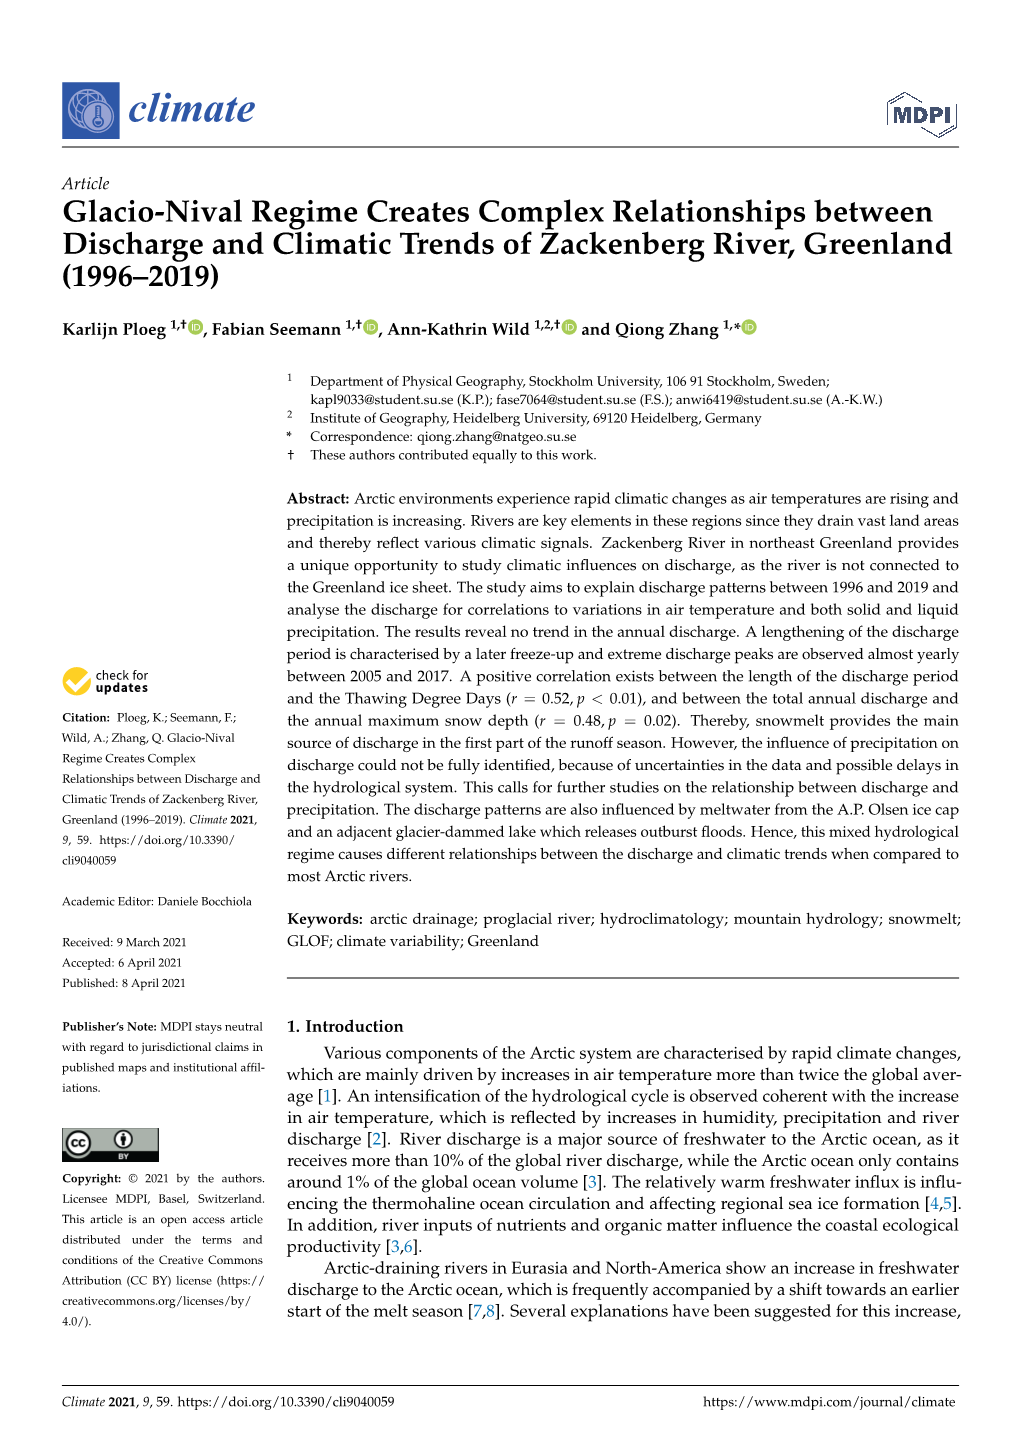 Glacio-Nival Regime Creates Complex Relationships Between Discharge and Climatic Trends of Zackenberg River, Greenland (1996–2019)